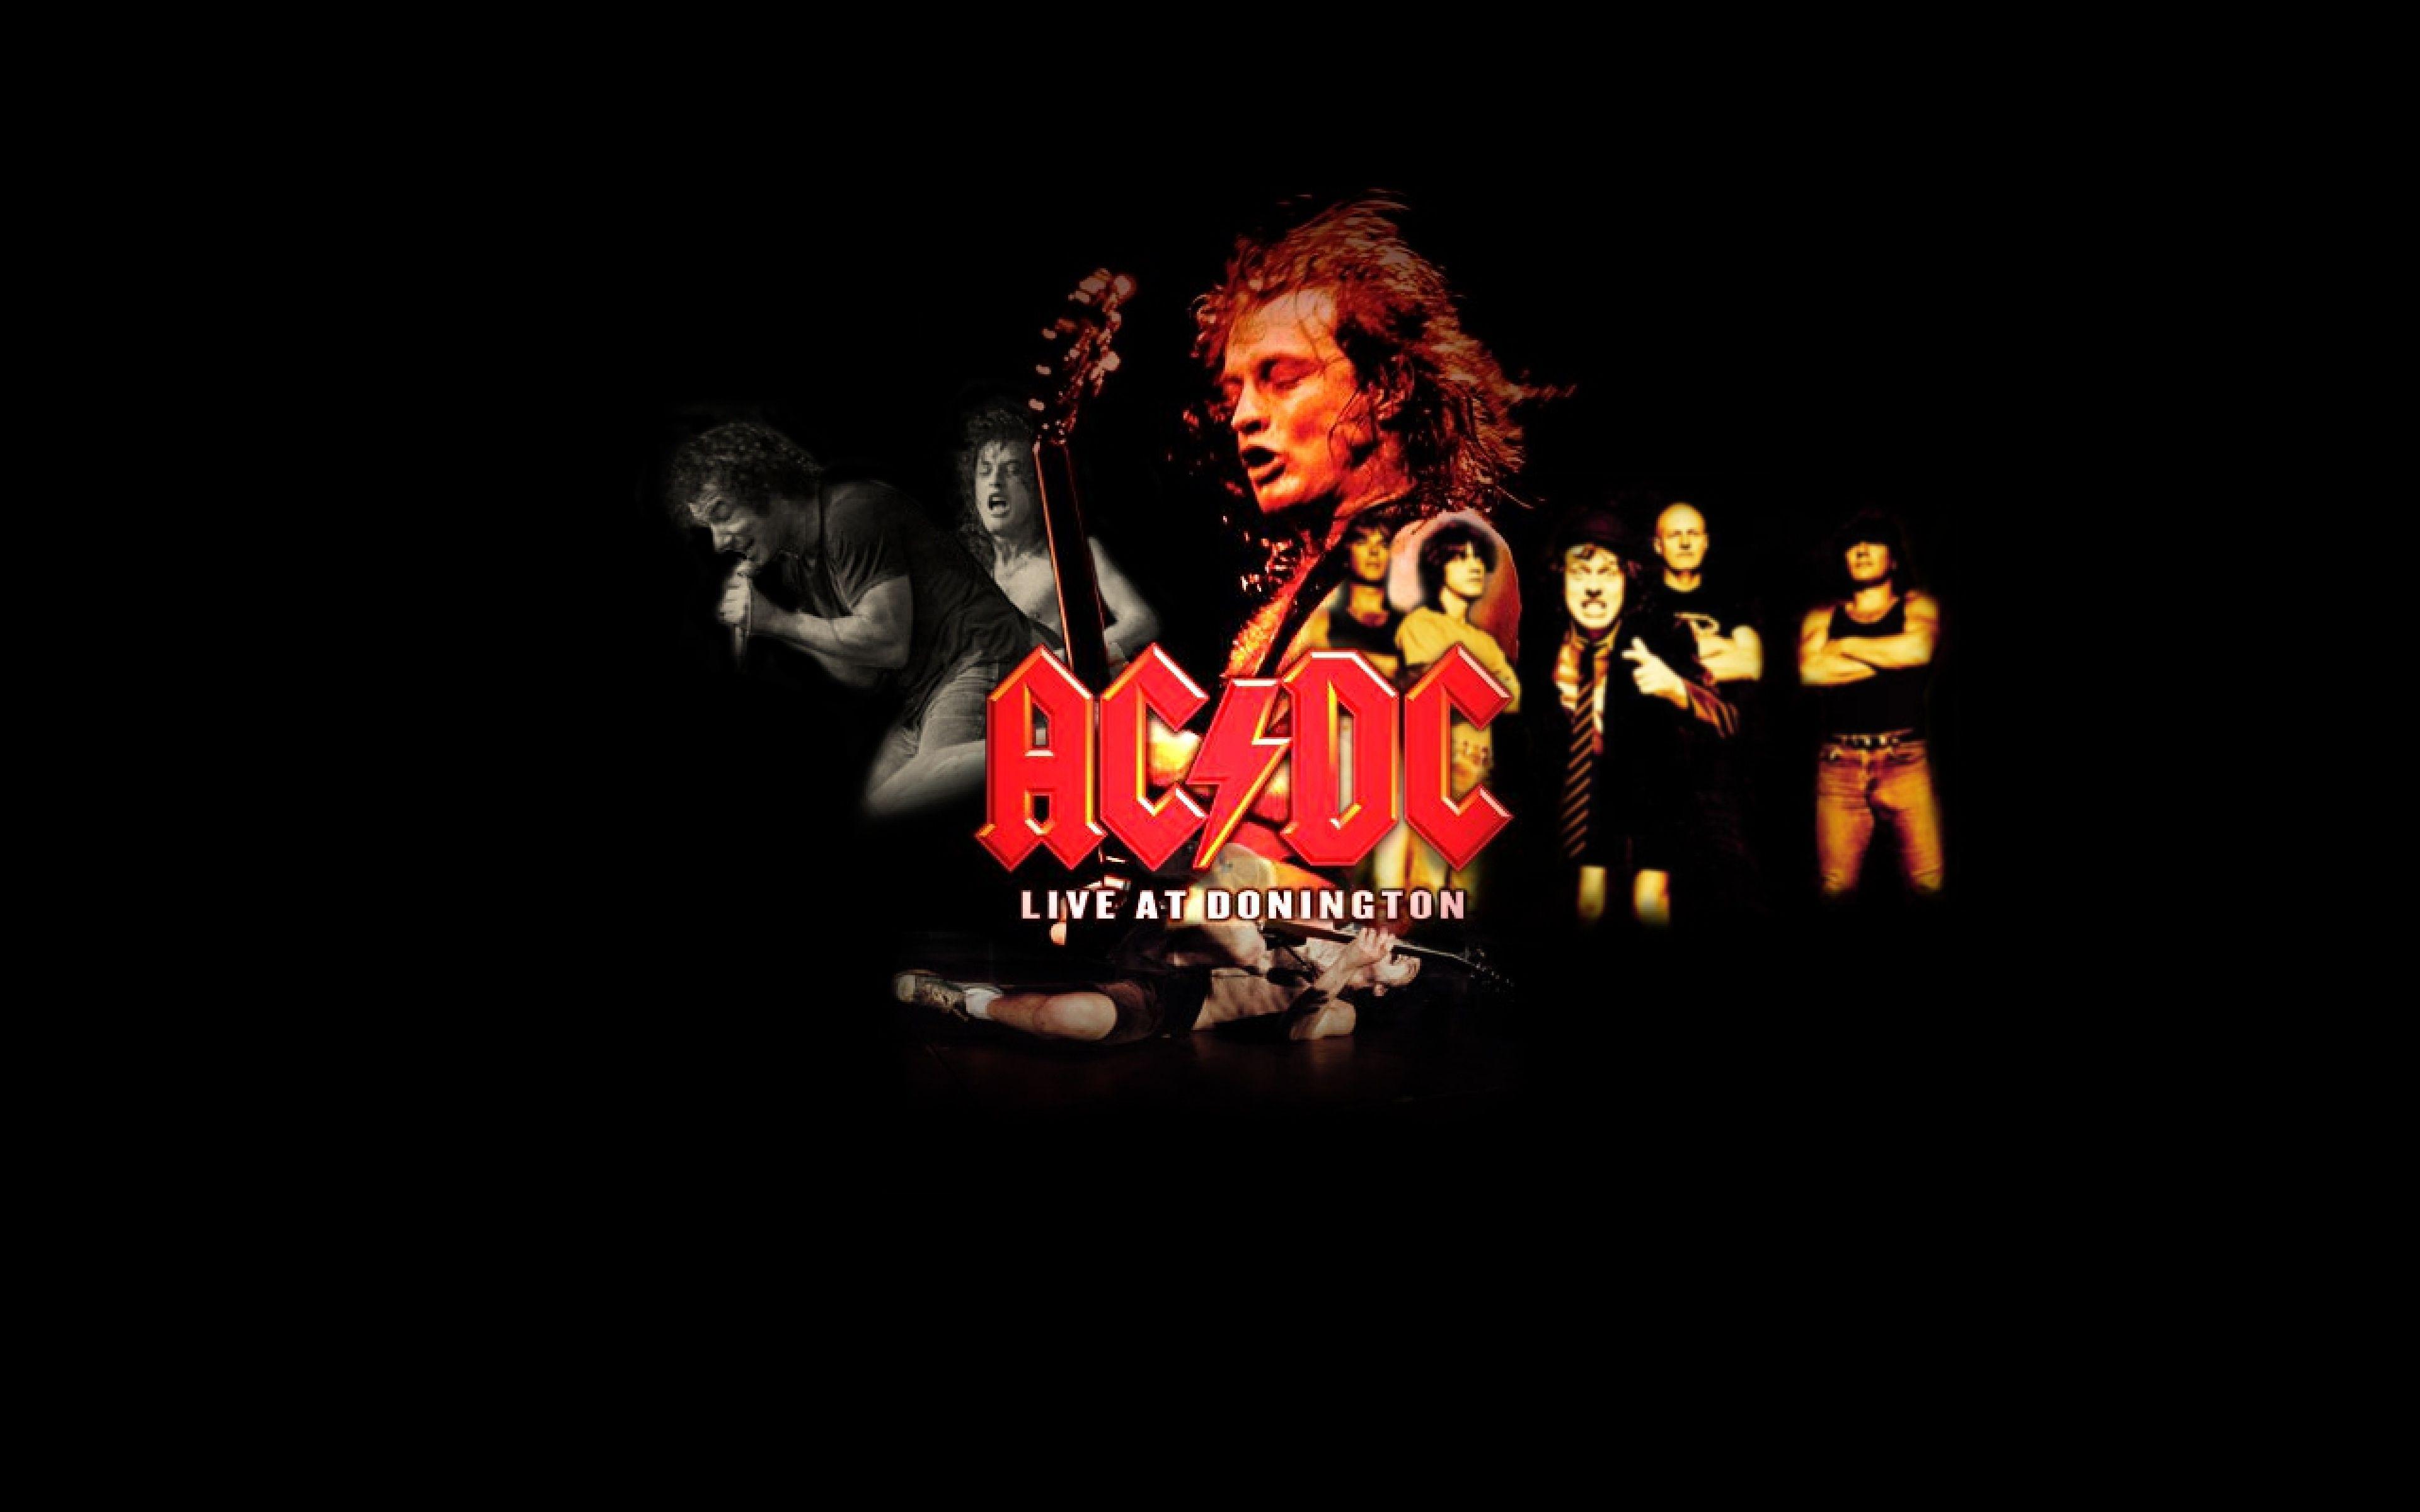 Wallpaper.wiki Ac Dc Group Solo Emotions Image 3840x2400 PIC